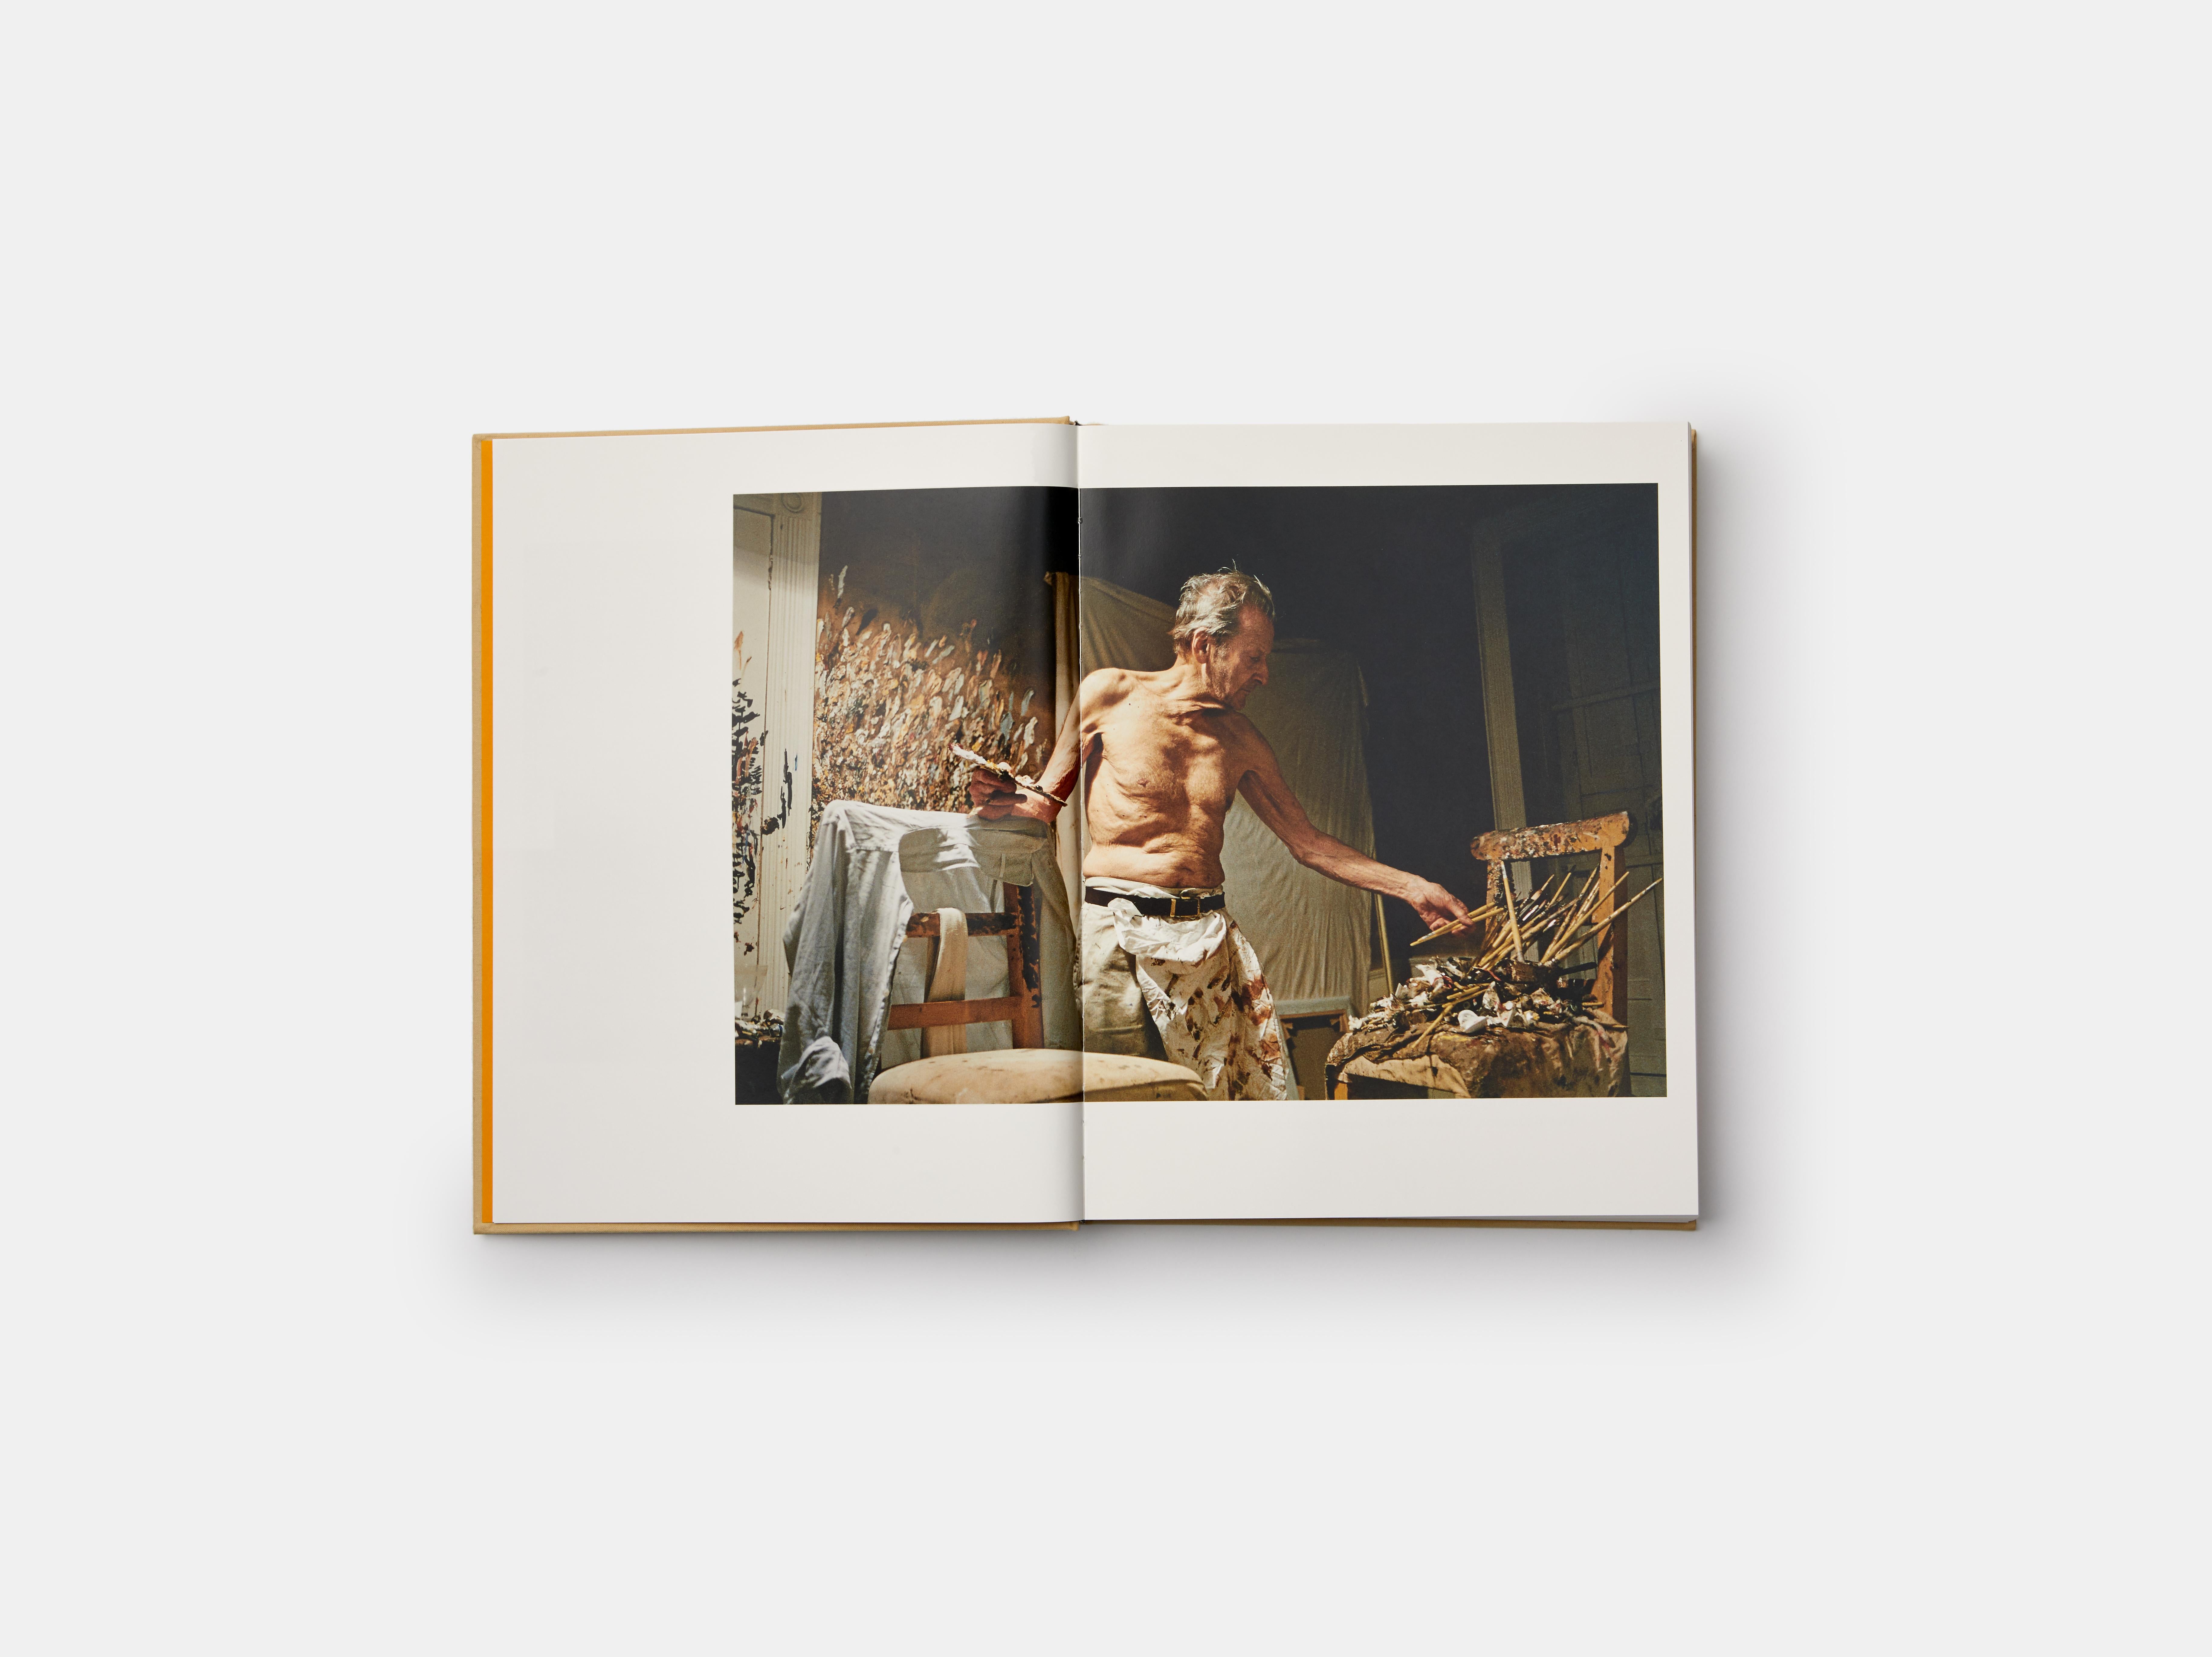 A breathtaking visual biography of Freud, told through his own words, unpublished private photographs, and painted portraits

This unprecedented look at the private life of Lucian Freud begins with childhood snapshots and ends with rarely seen